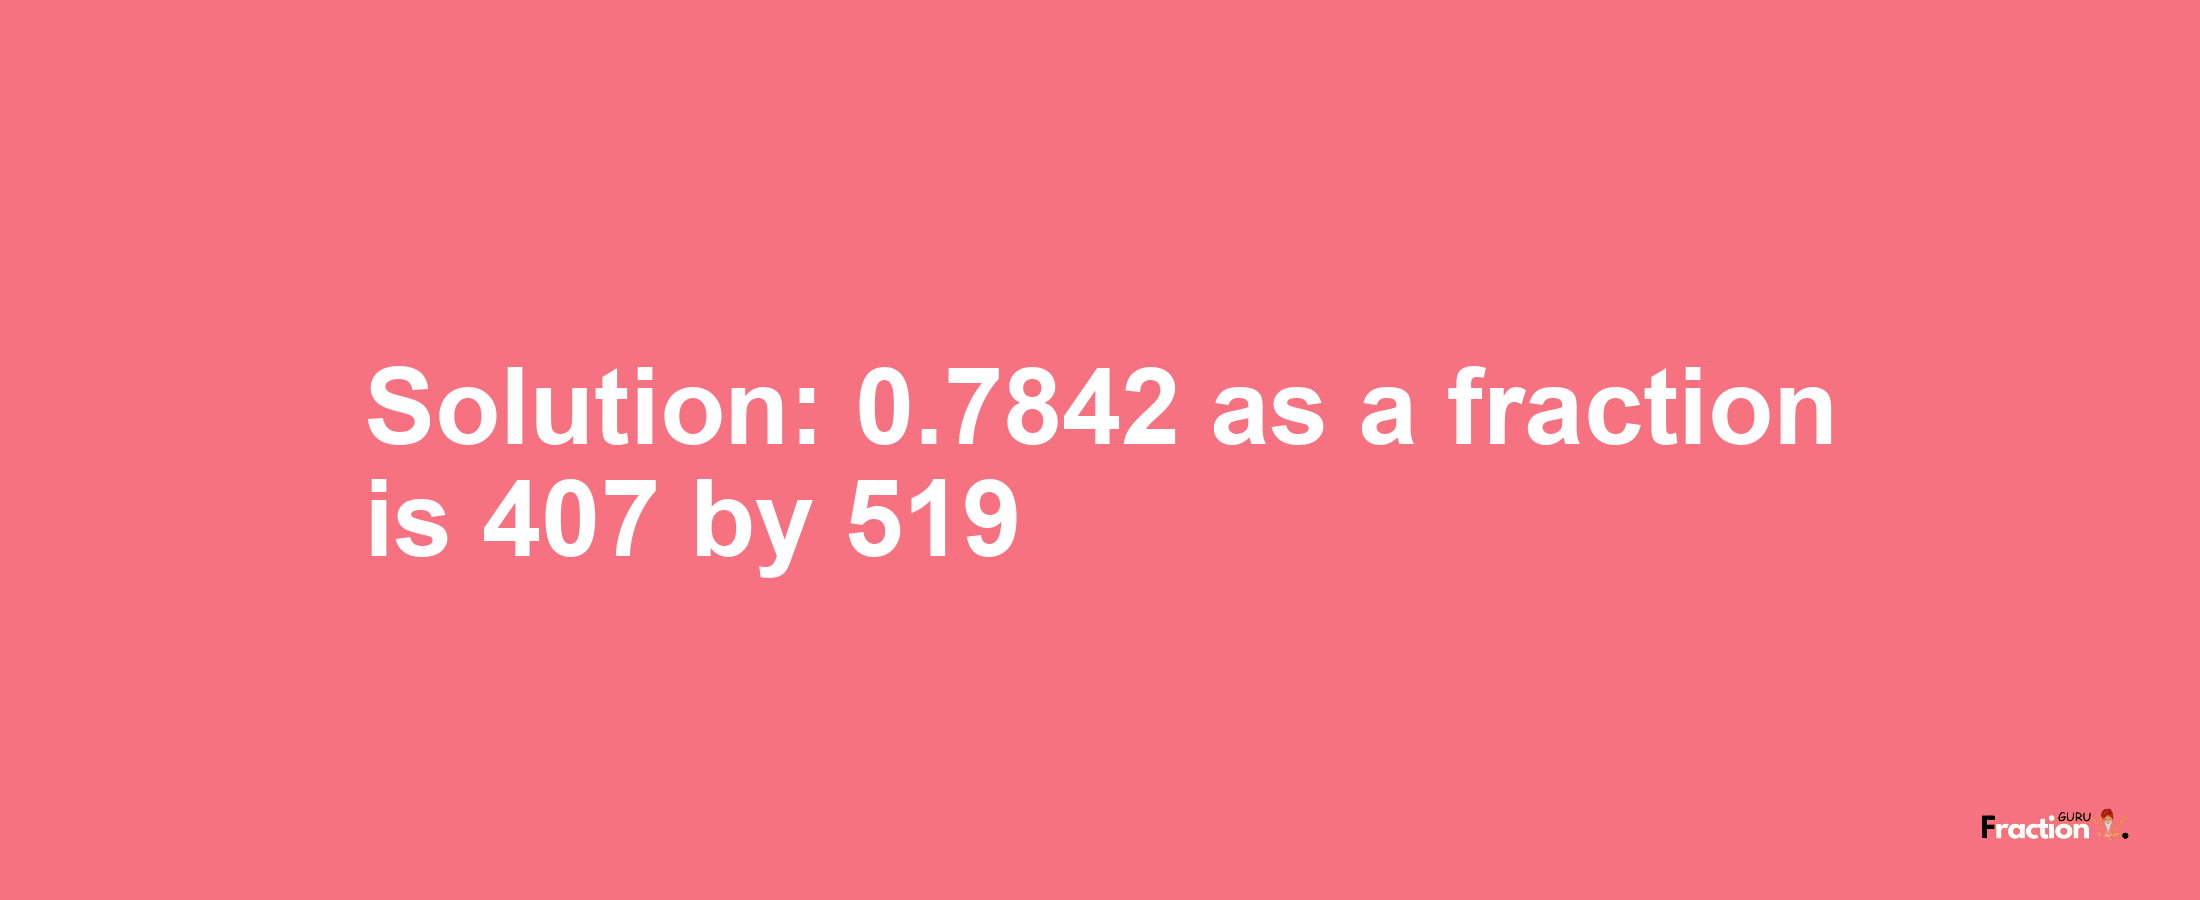 Solution:0.7842 as a fraction is 407/519